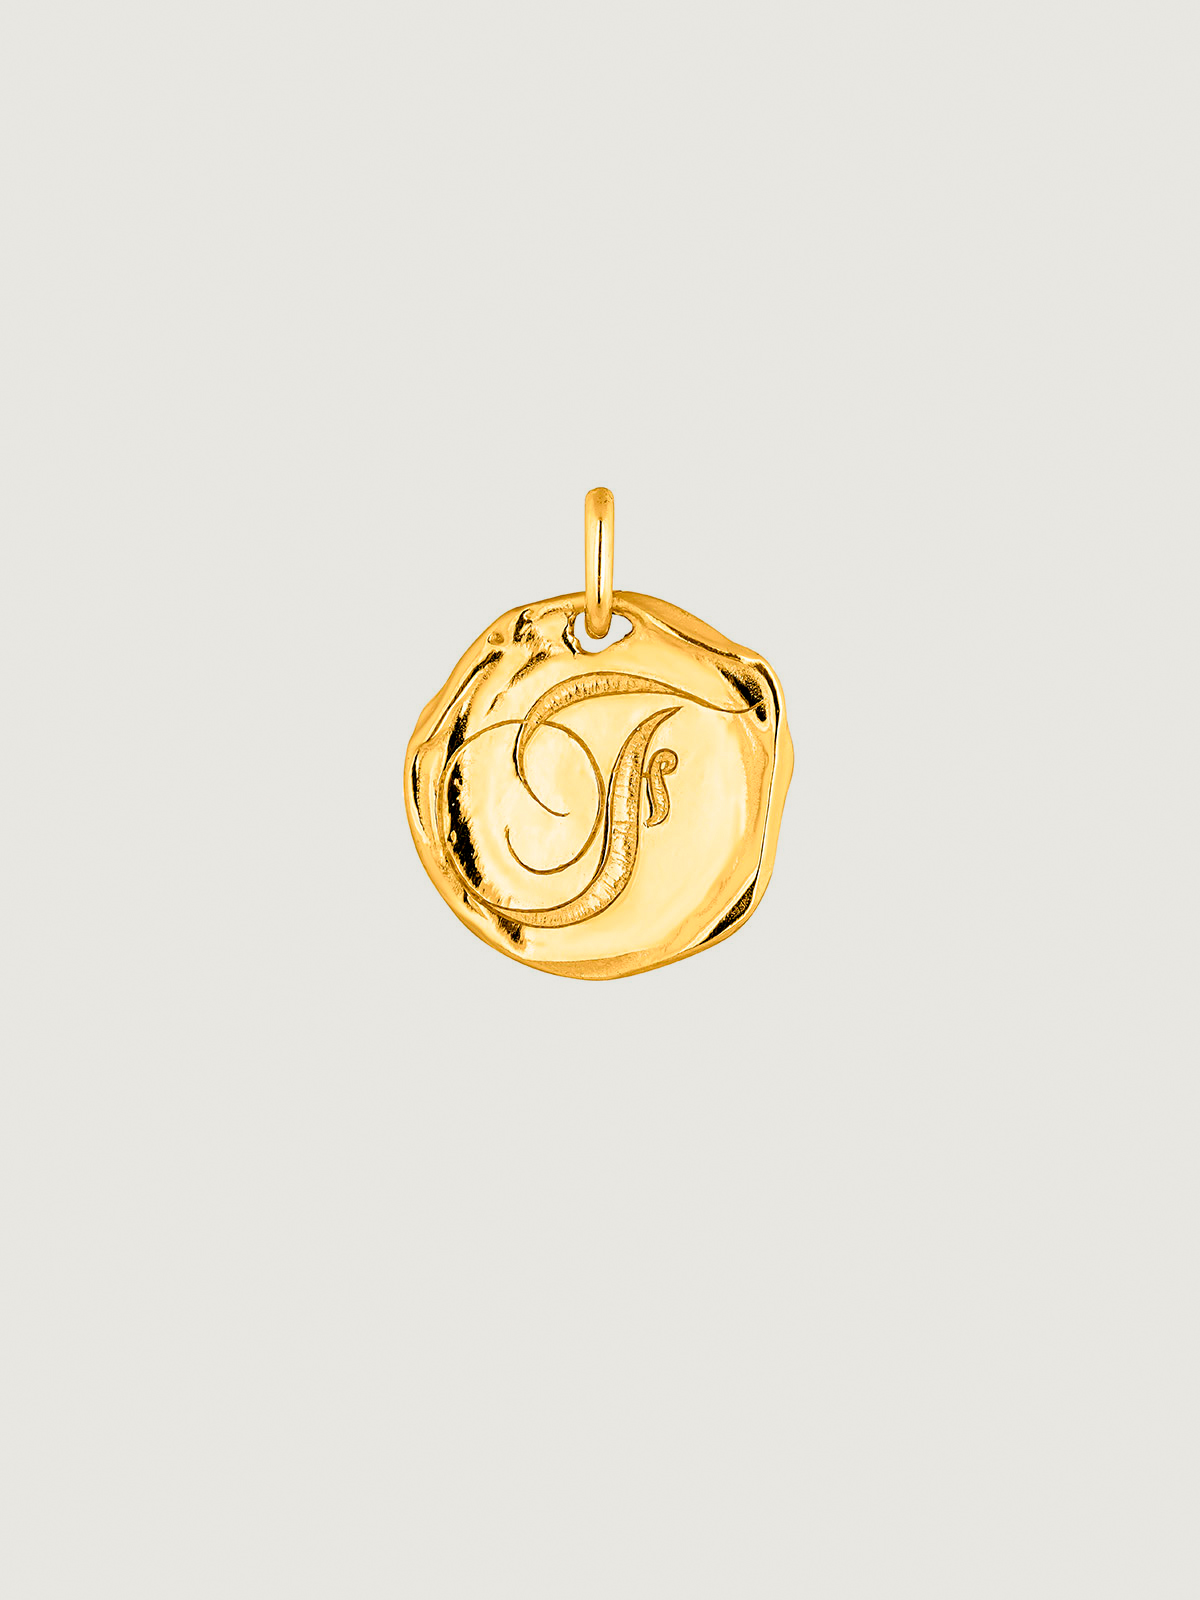 Handcrafted charm made of 925 silver, bathed in 18K yellow gold with initial F.